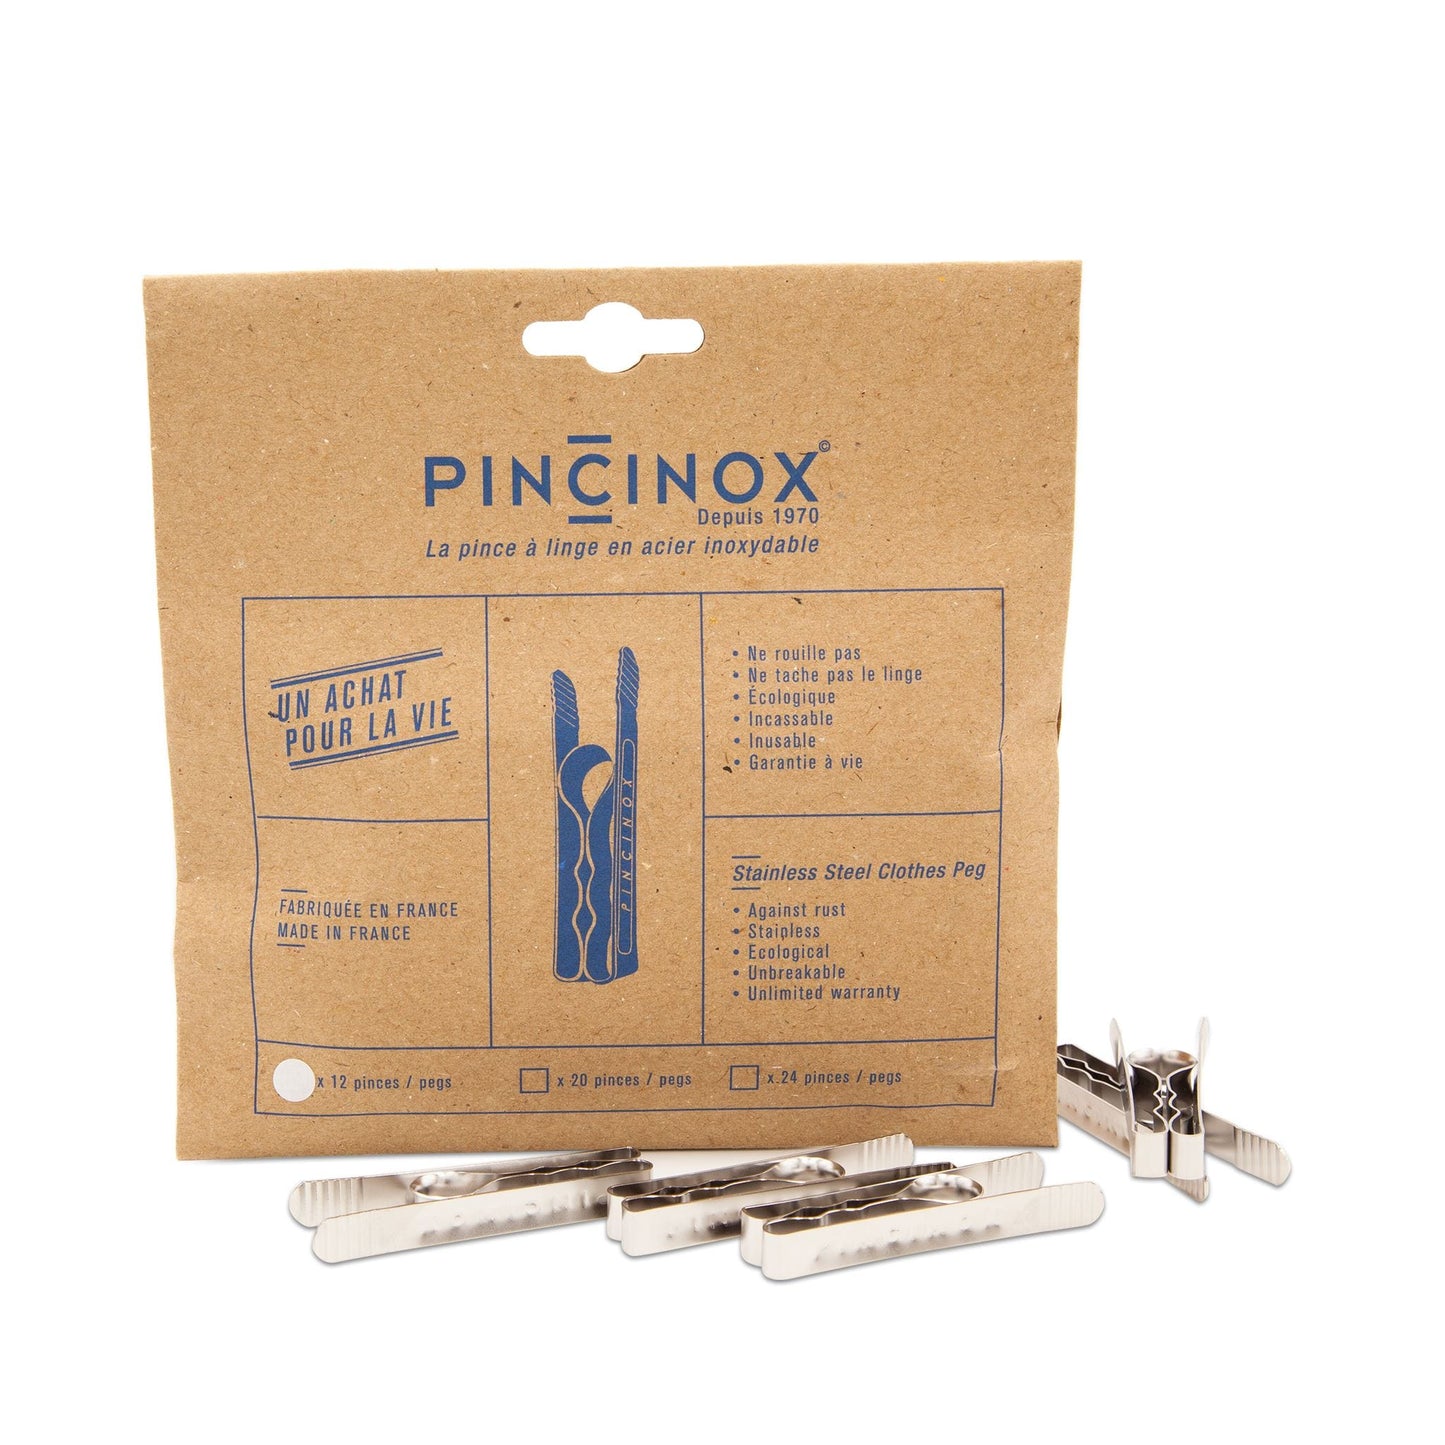 Faerly Clothespins Pack of 12 Pincinox Stainless Steel Clothes Pegs - Clothespins for Life